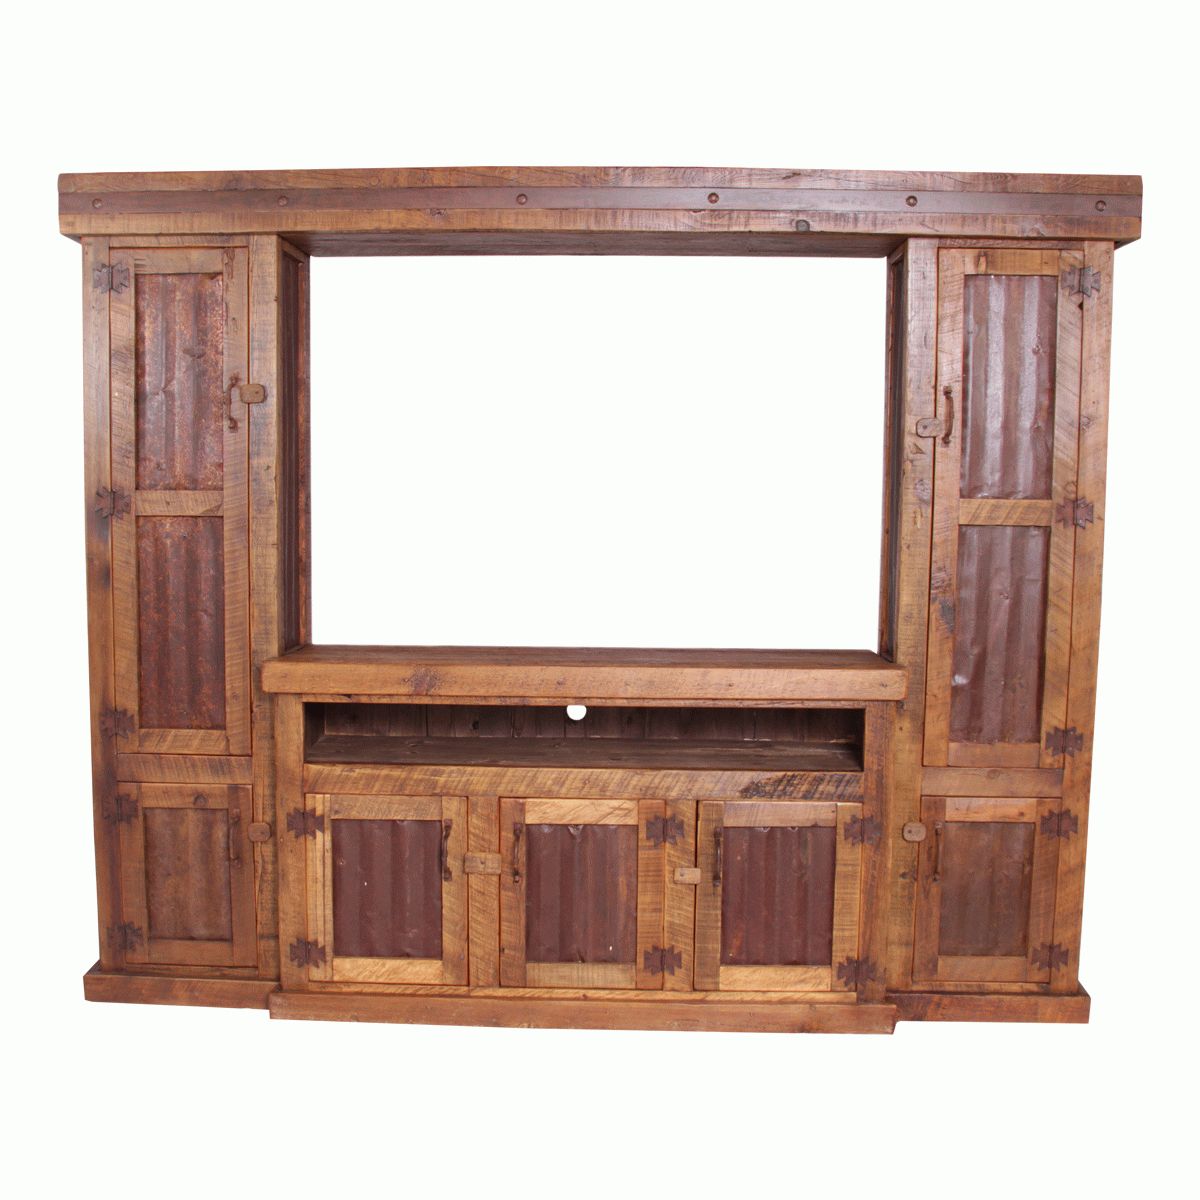 Popular Rustic Tv Stands: Old West Tin 4 Piece Entertainment Center With Rustic Looking Tv Stands (View 18 of 20)